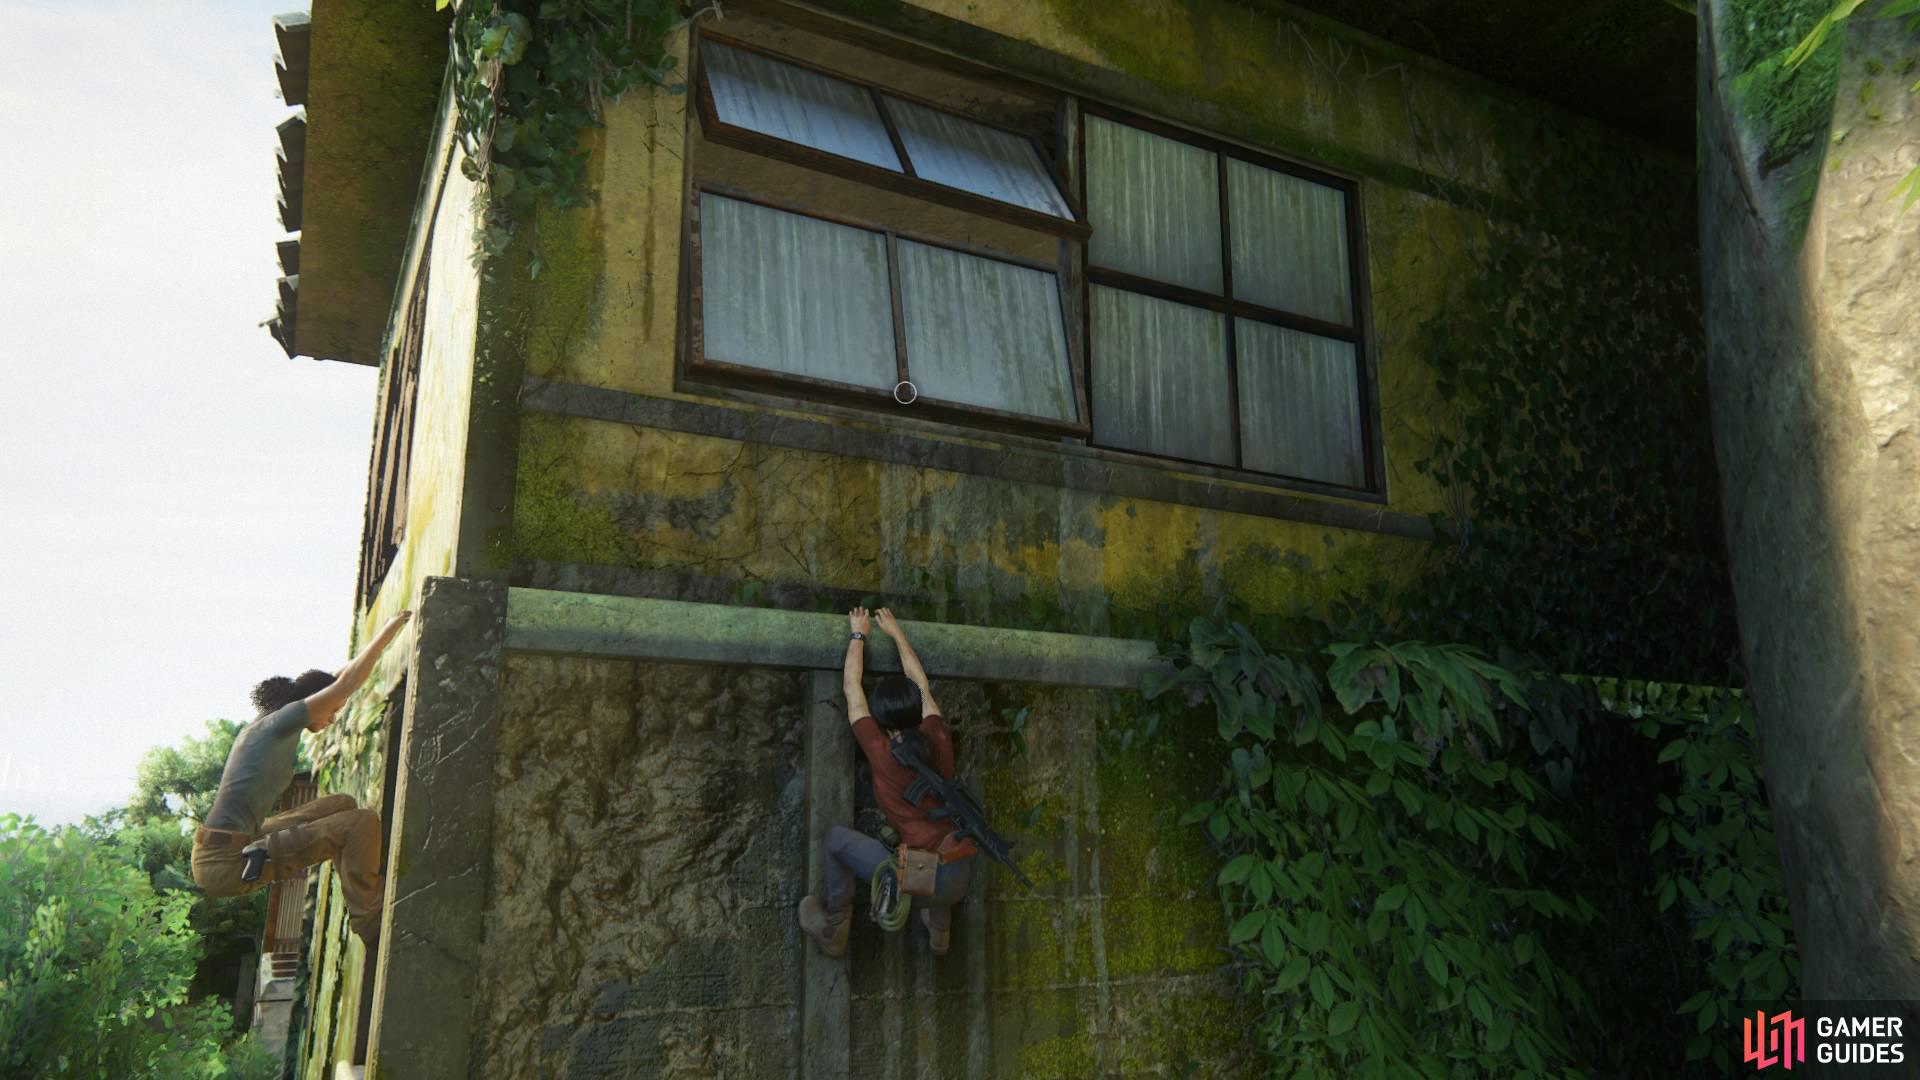 Swing over to the window and climb through